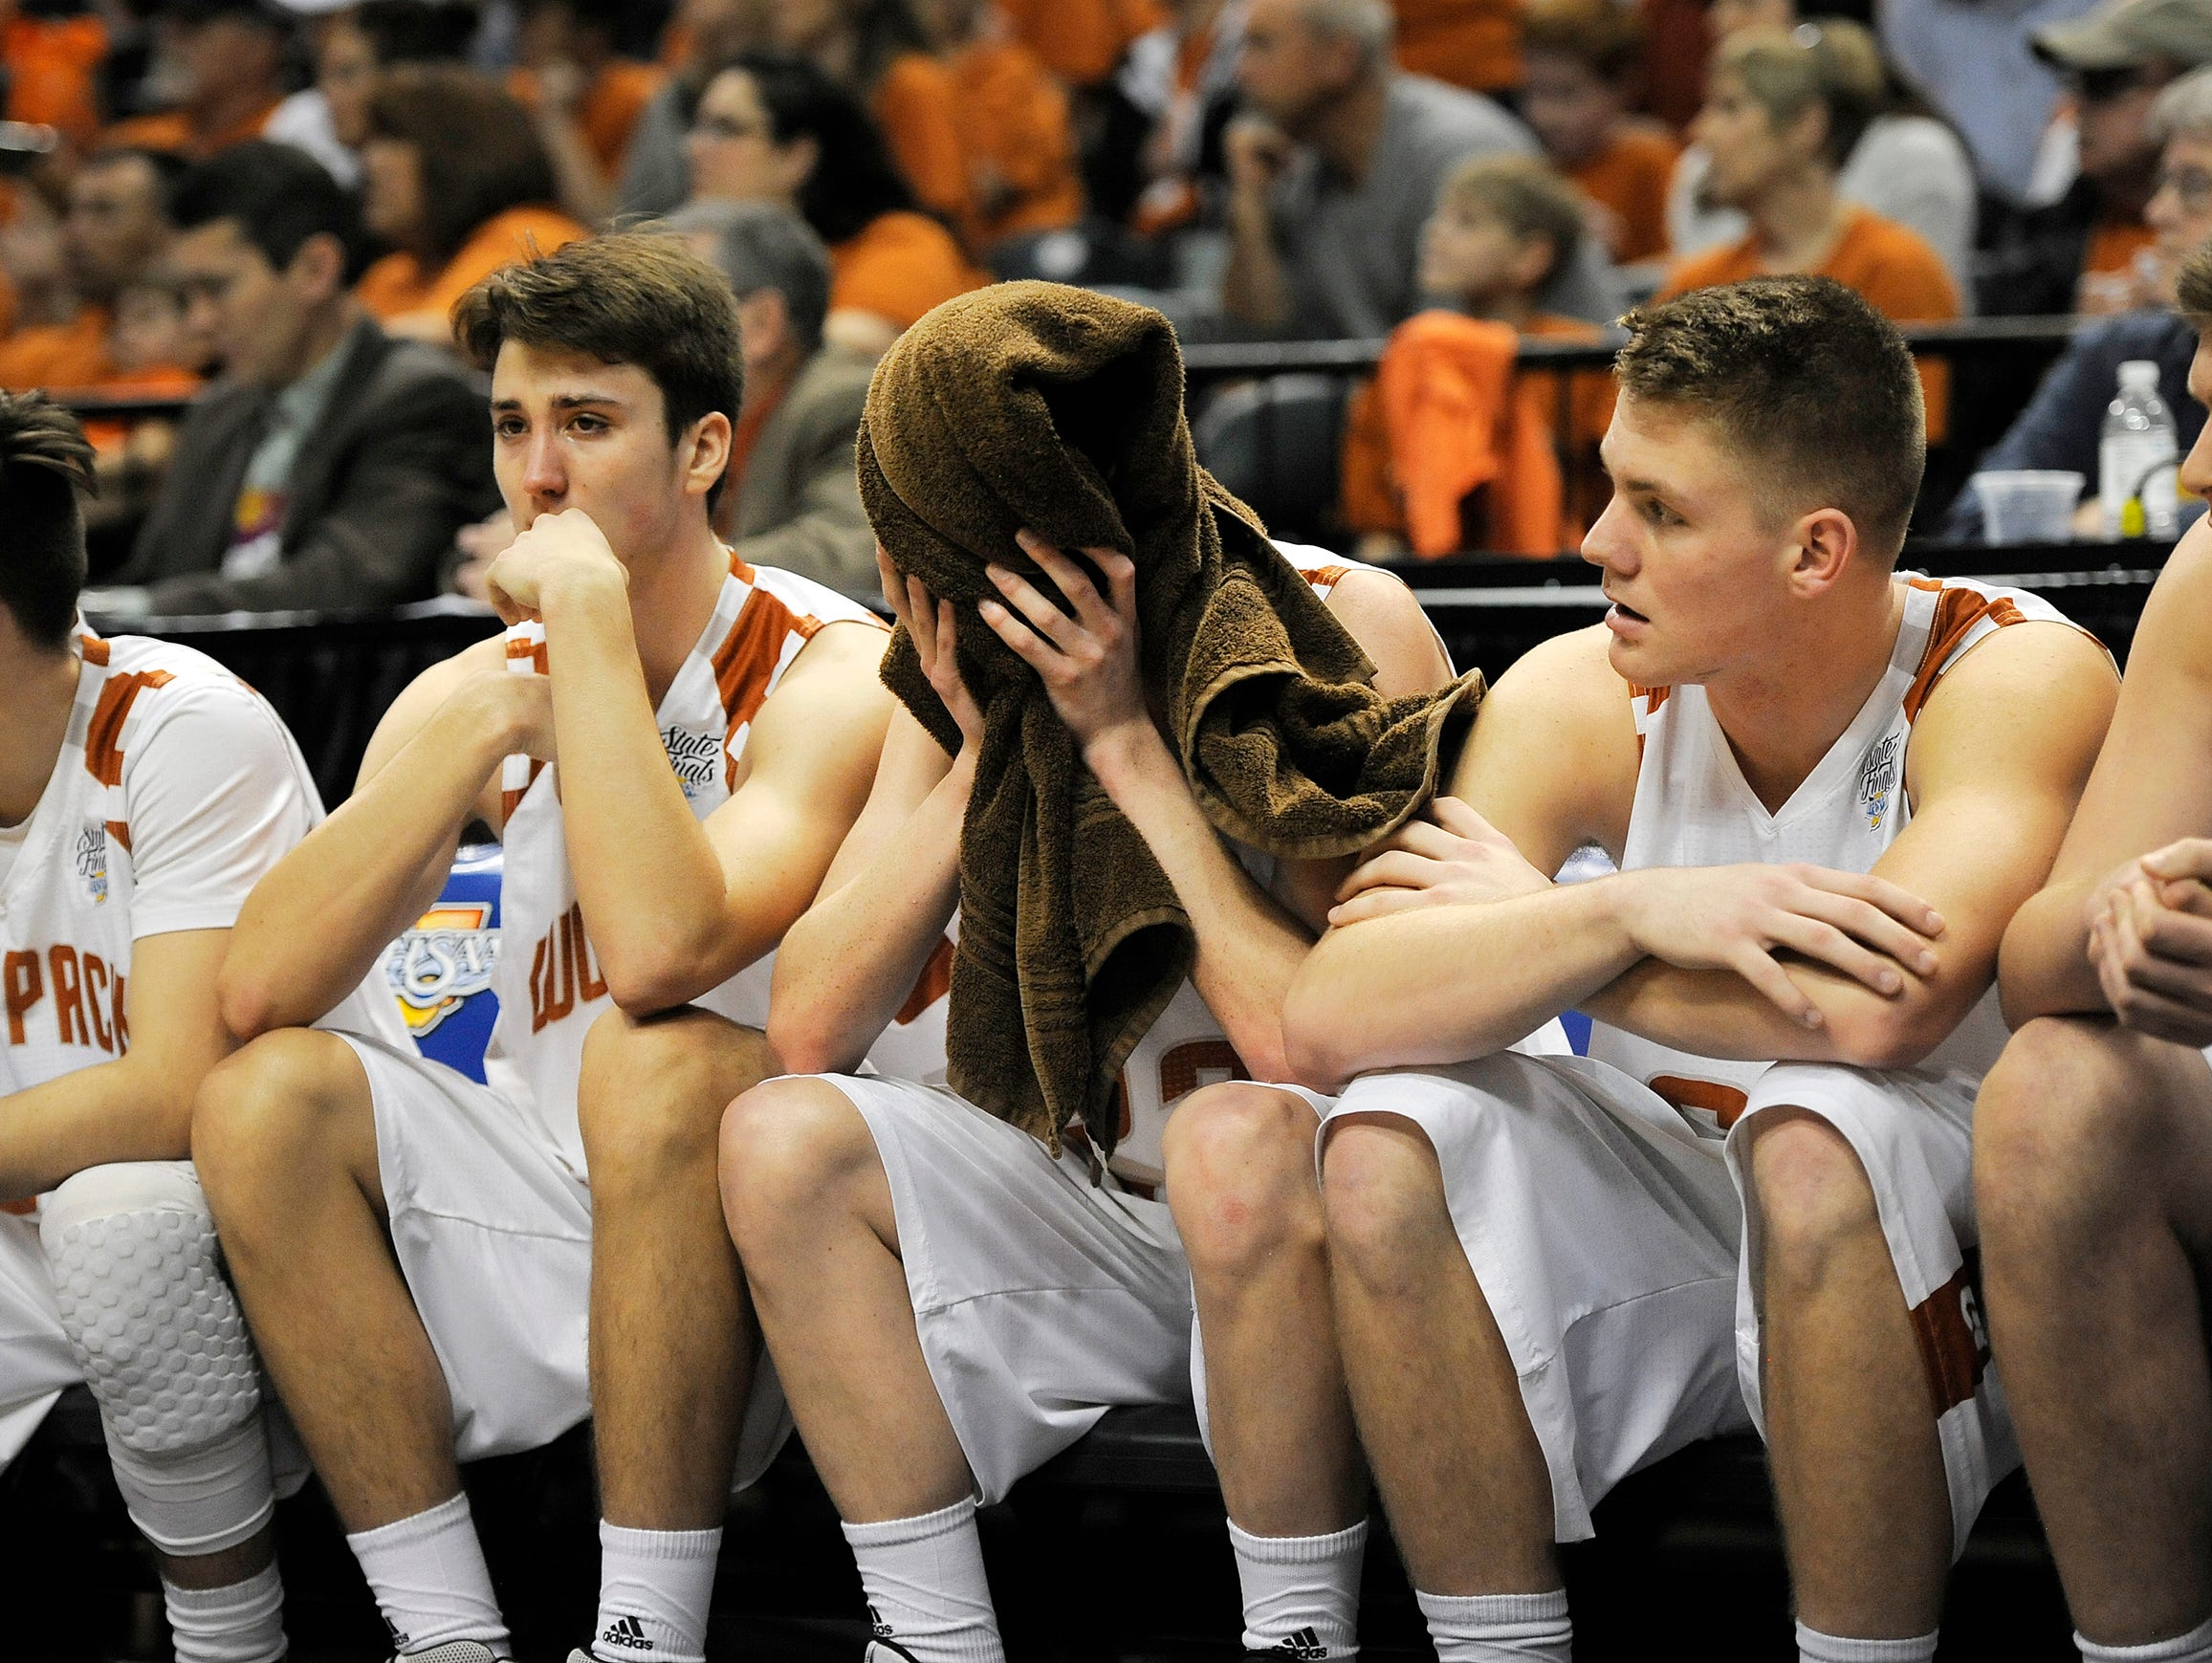 Crawford County sits dejected on the bench as the clock winds down in a loss to Frankton 60-32 on Saturday in the 2017 IHSAA 2A Boys Basketball State Final at Bankers Life Fieldhouse in Indianapolis. Mar. 25, 2017